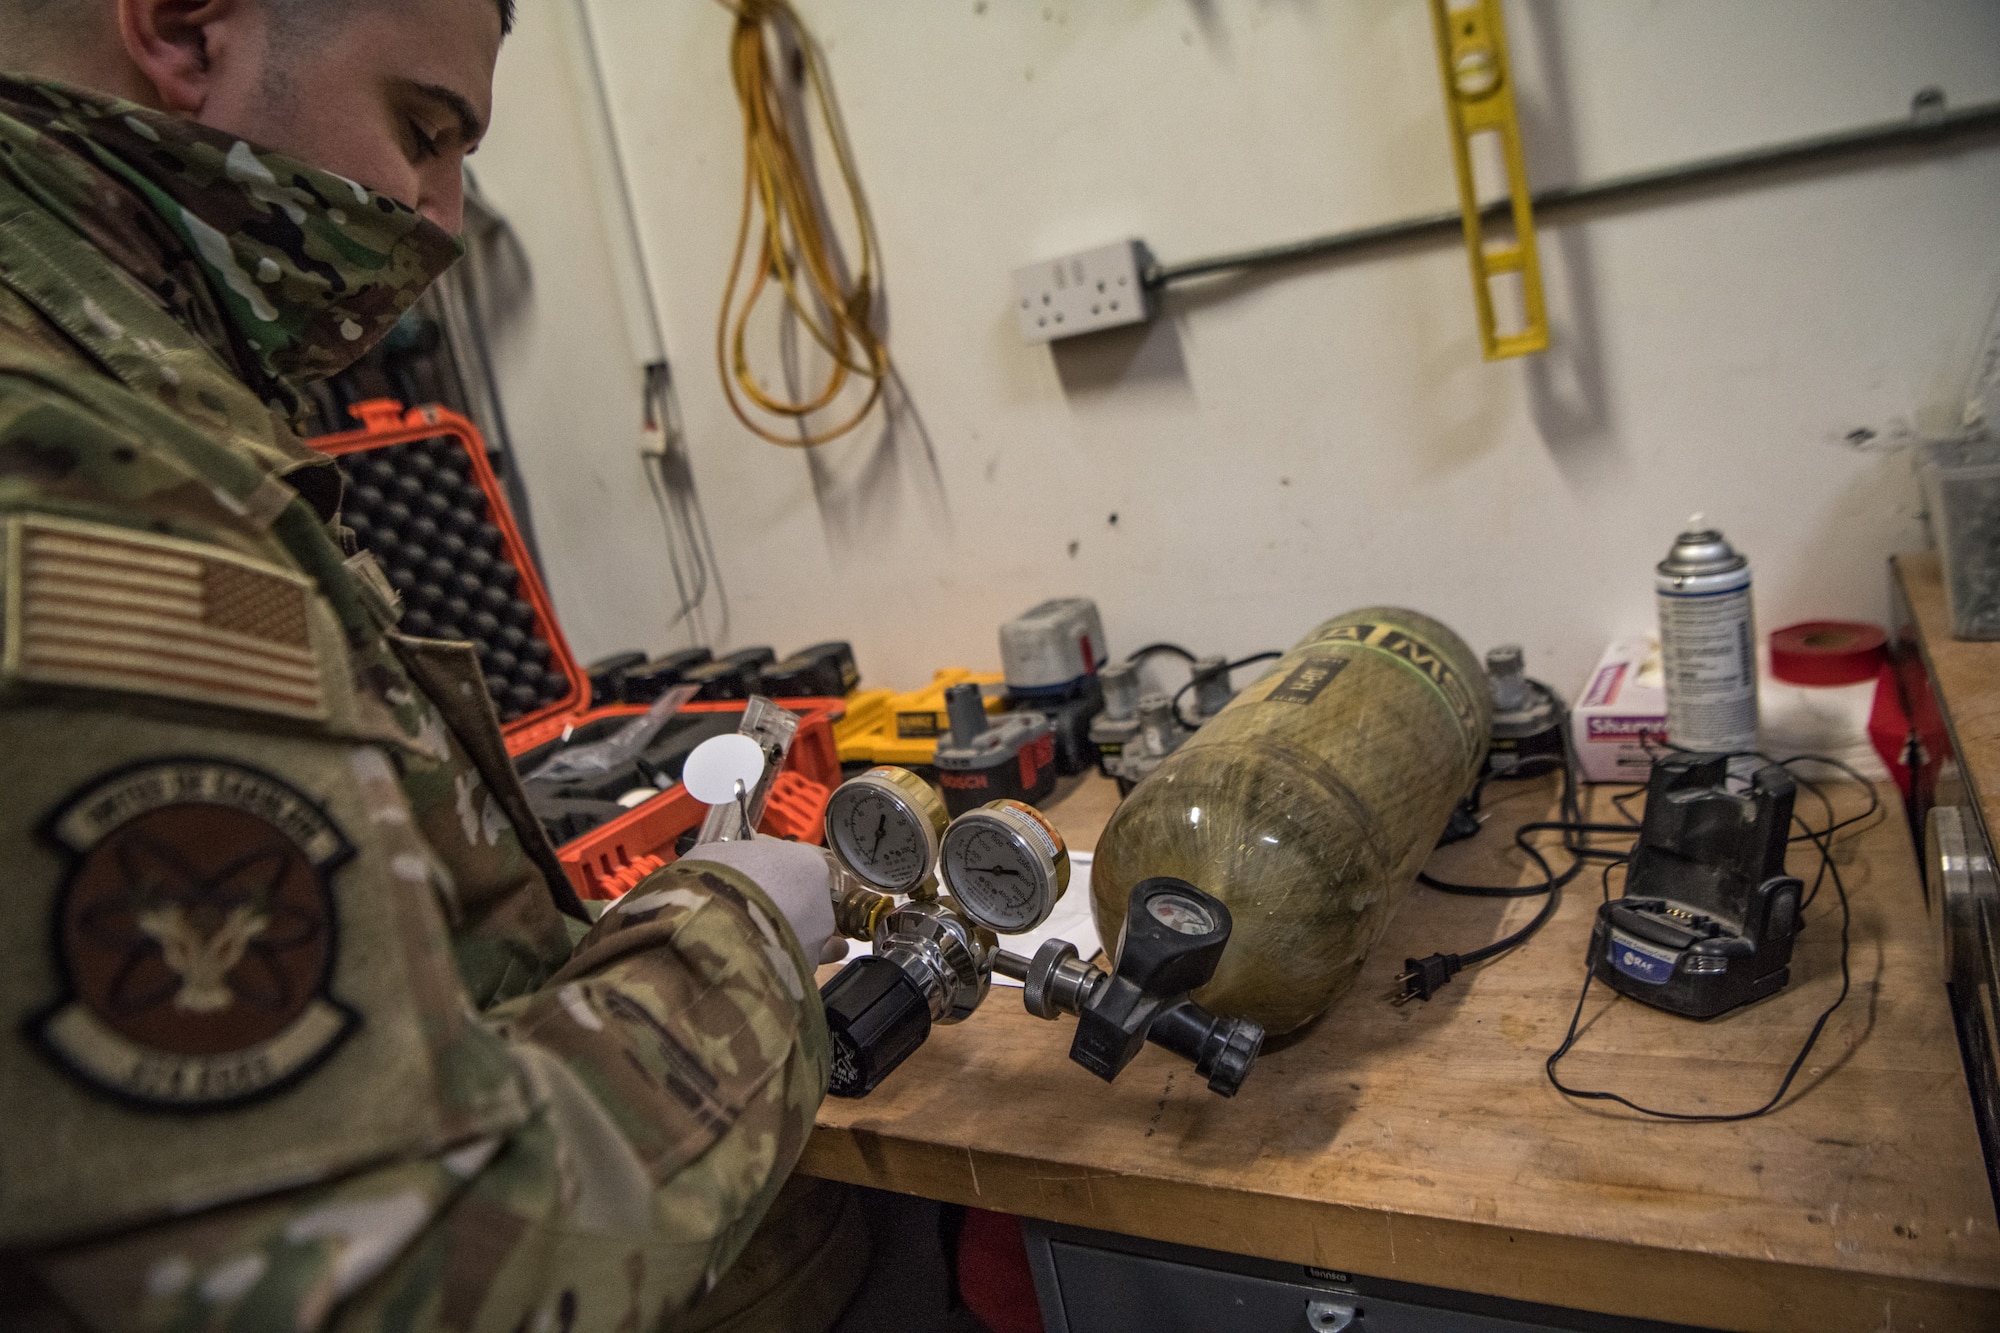 A man tests a self contained breathing apparatus on a table